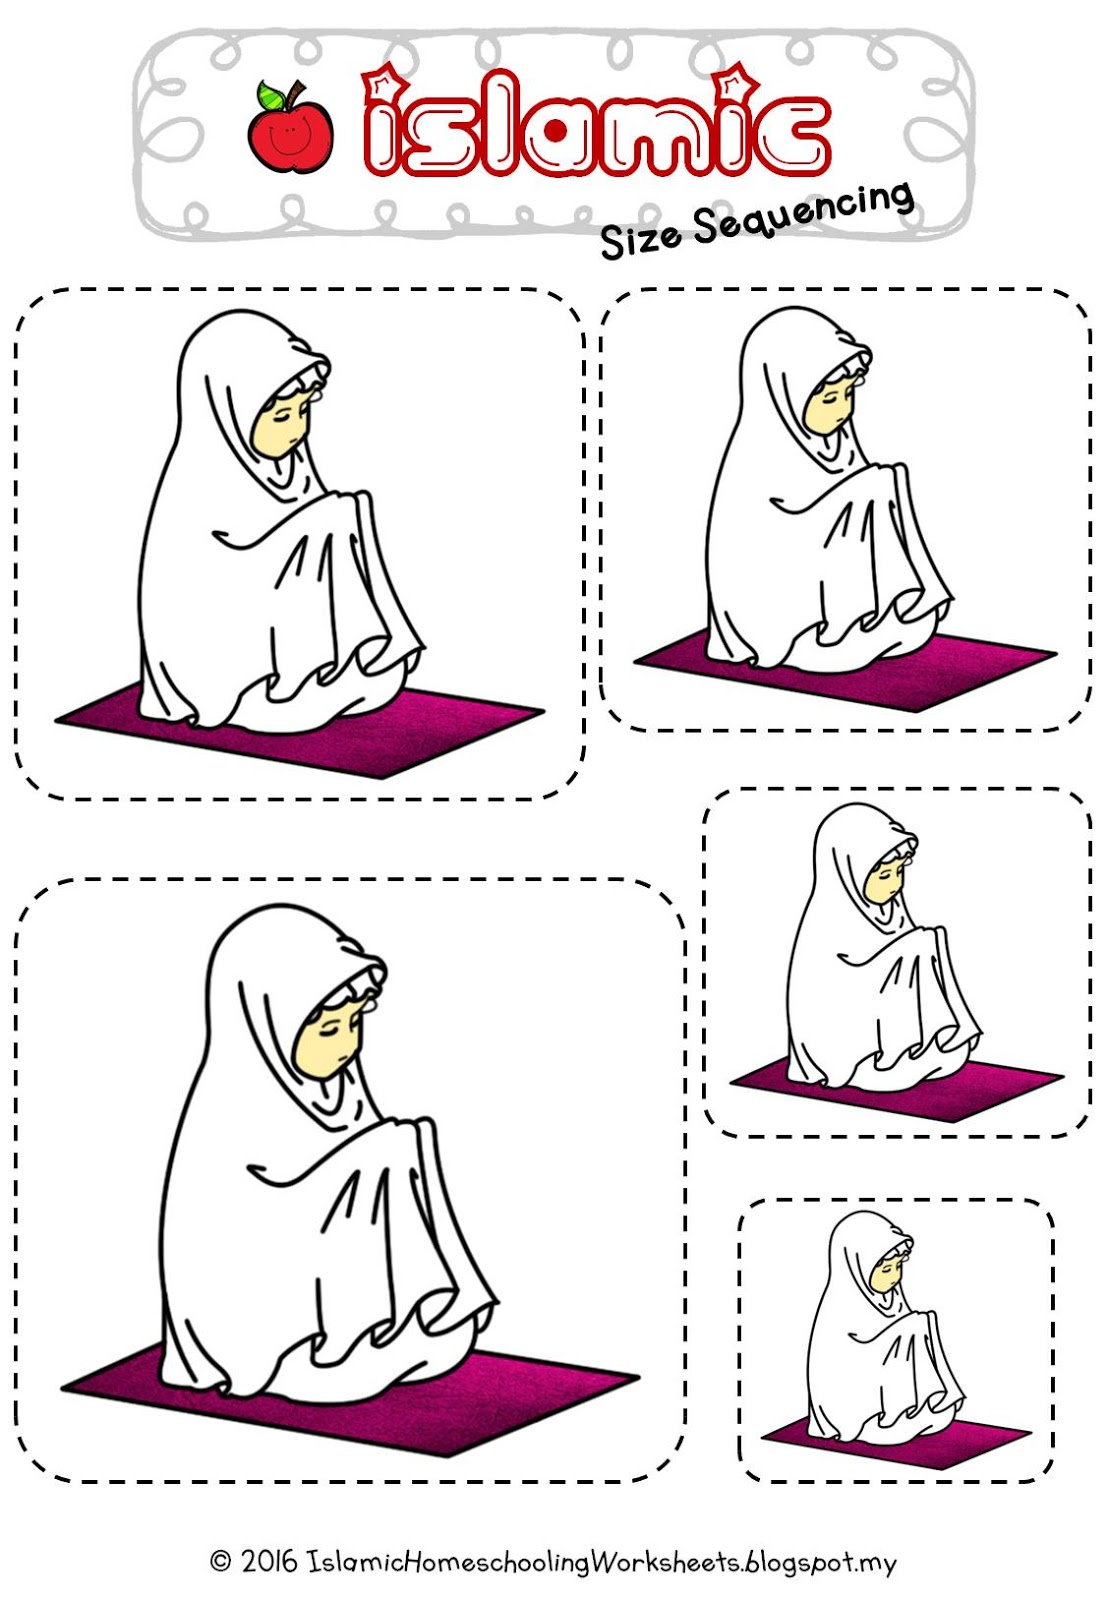 FREE Disney-Inspired Islamic Size Sequencing Printables 